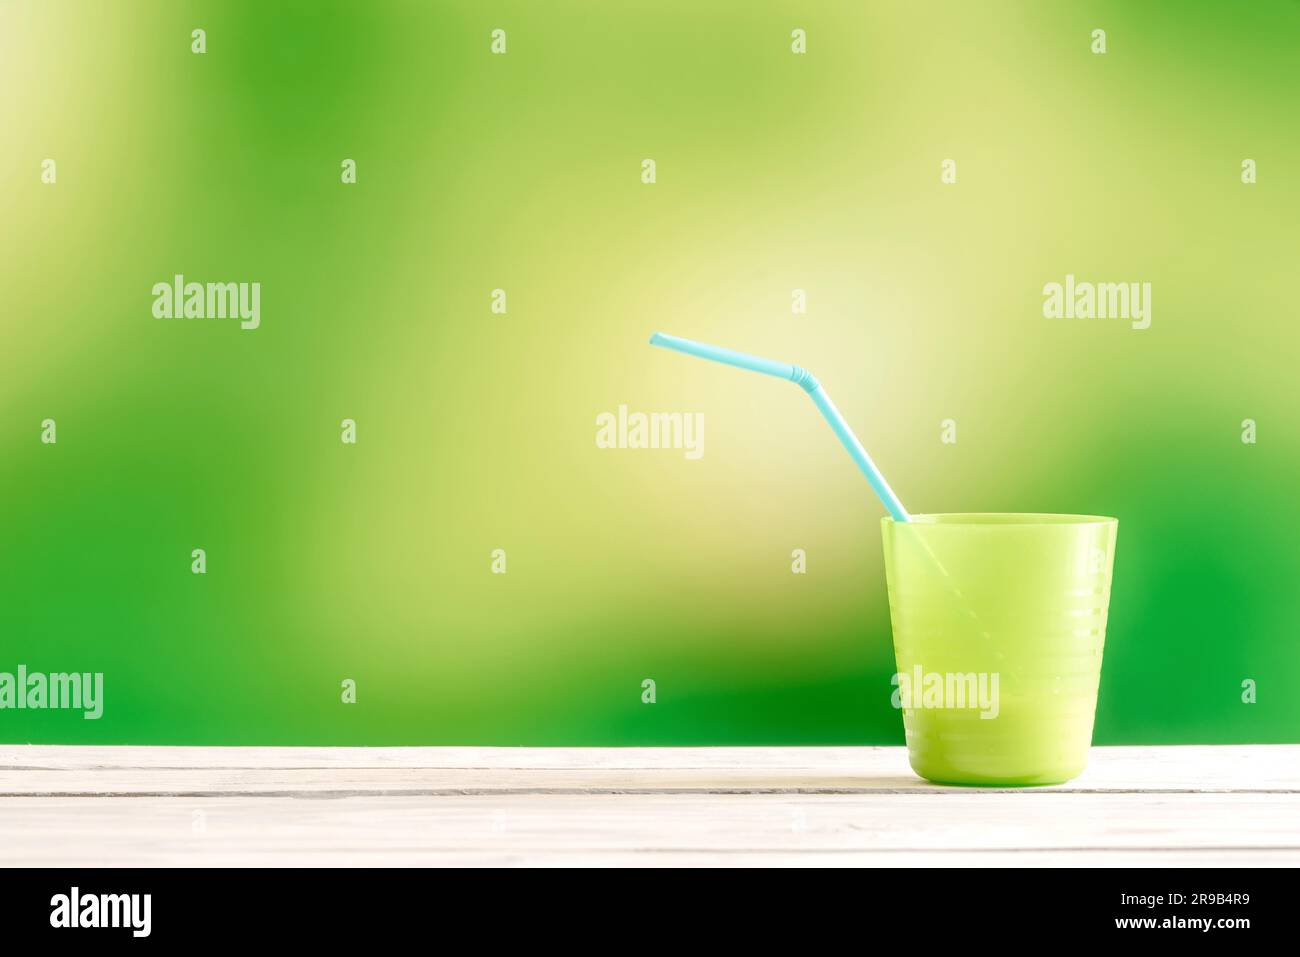 Green cup with a blue straw on a wooden table Stock Photo